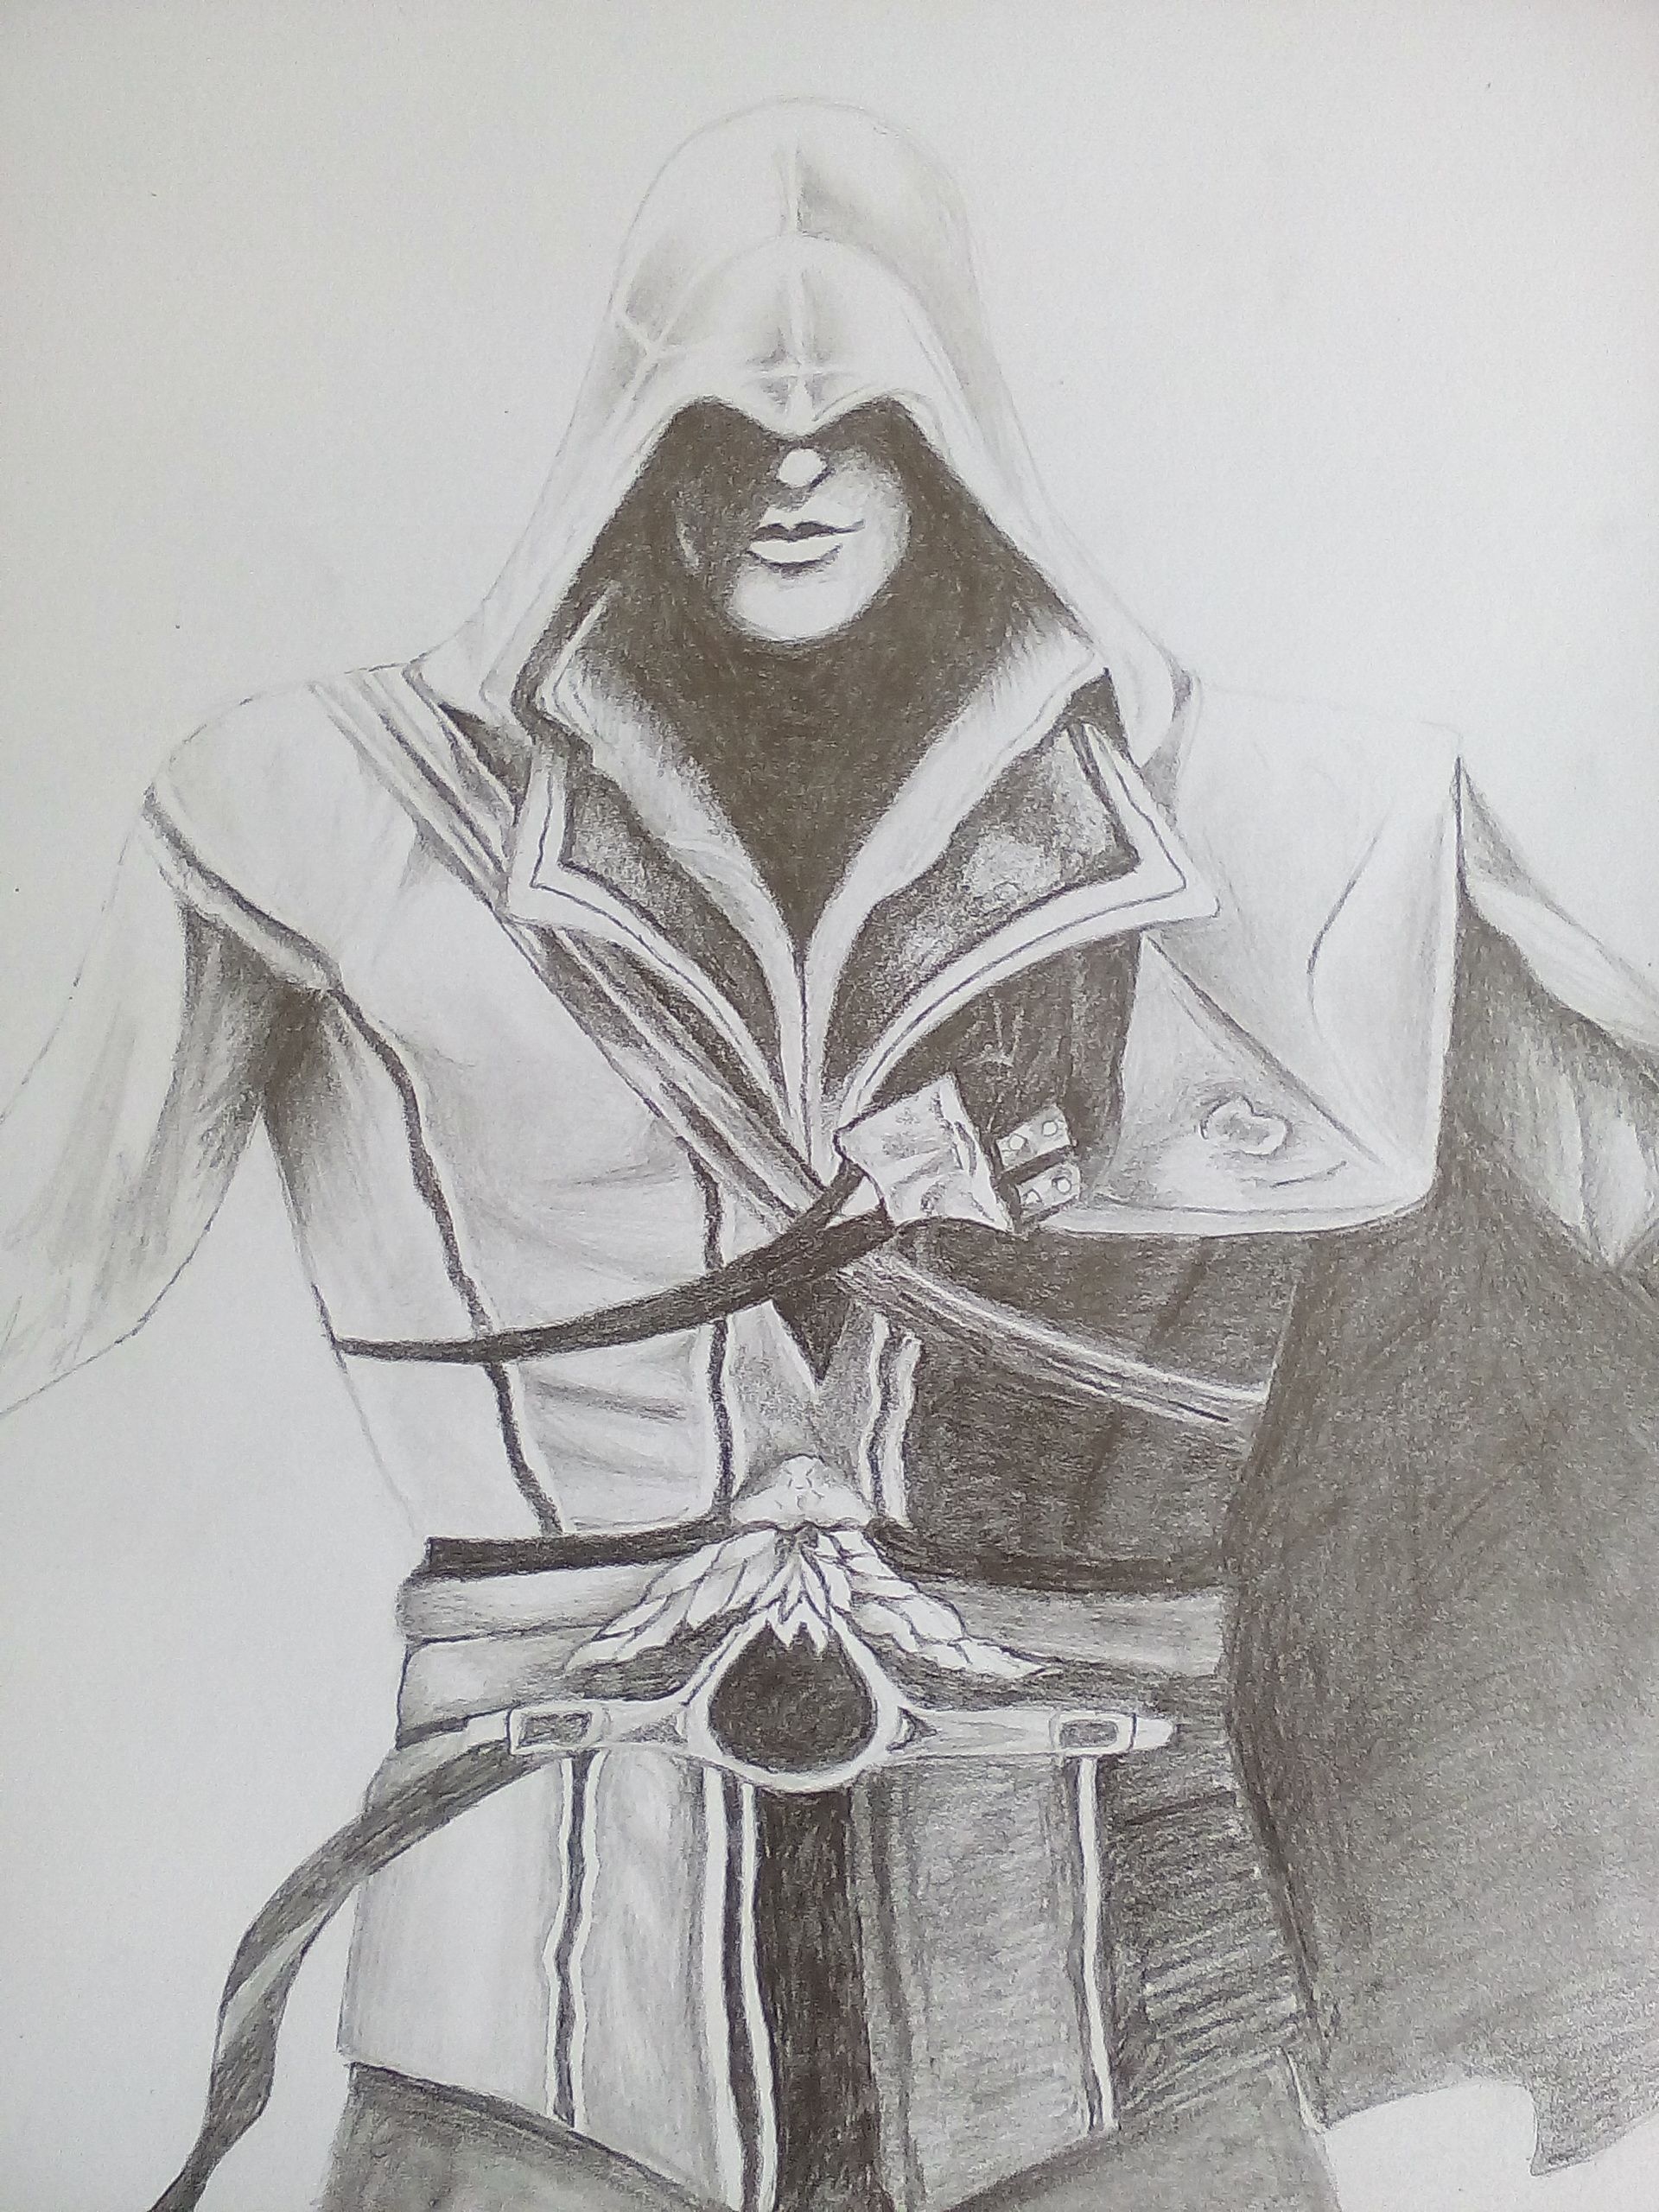 Assassin's Creed Drawings for Sale - Fine Art America